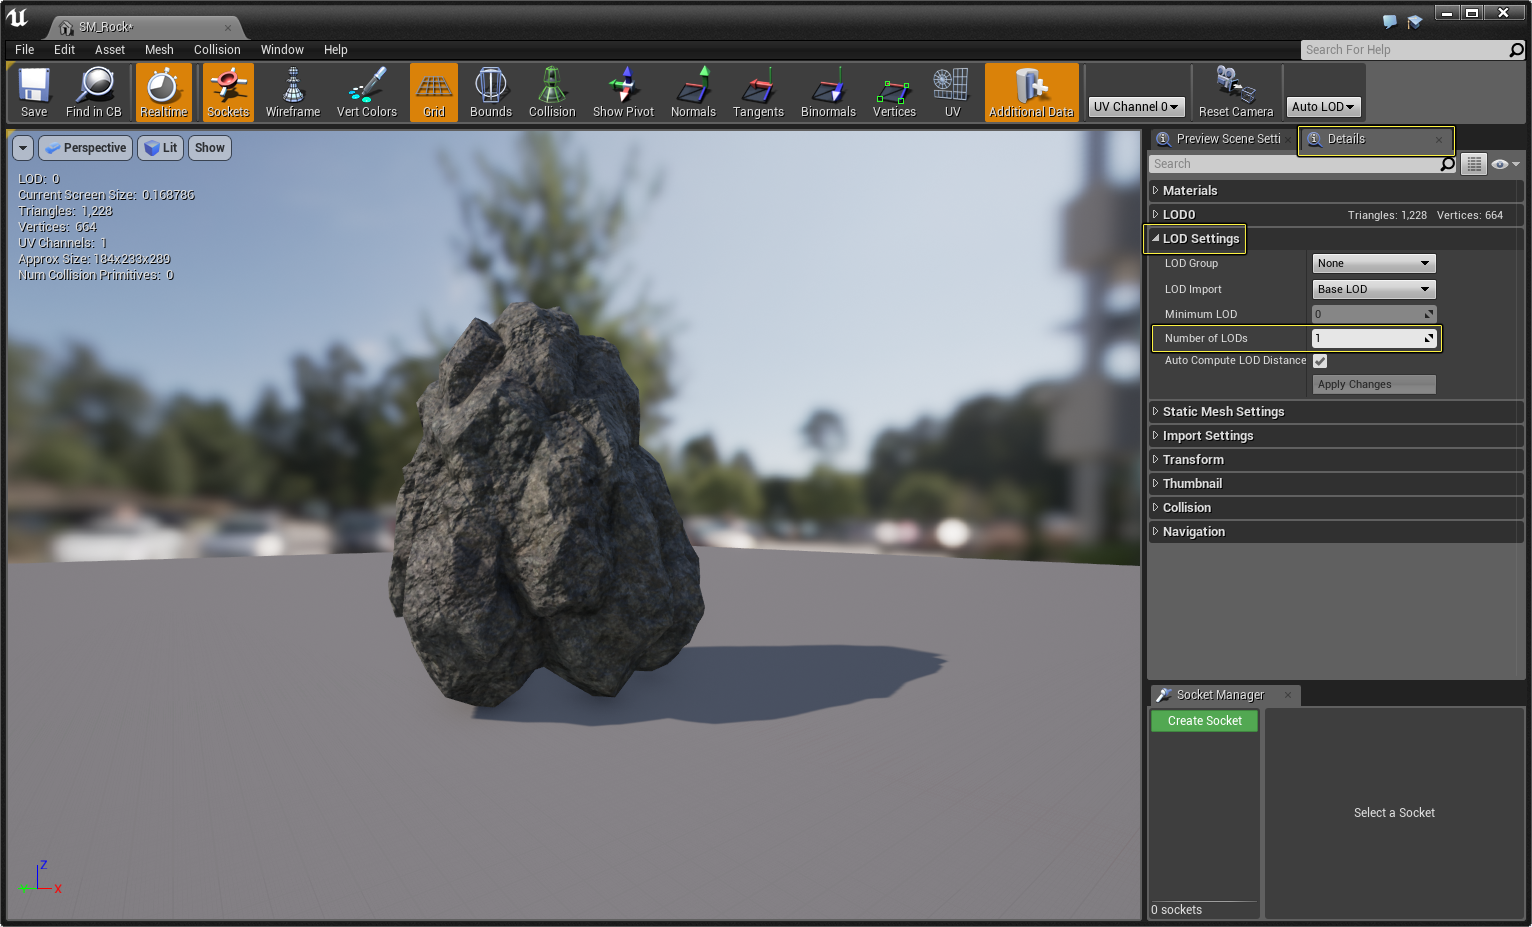 Does UE4 automatically generate LODs?